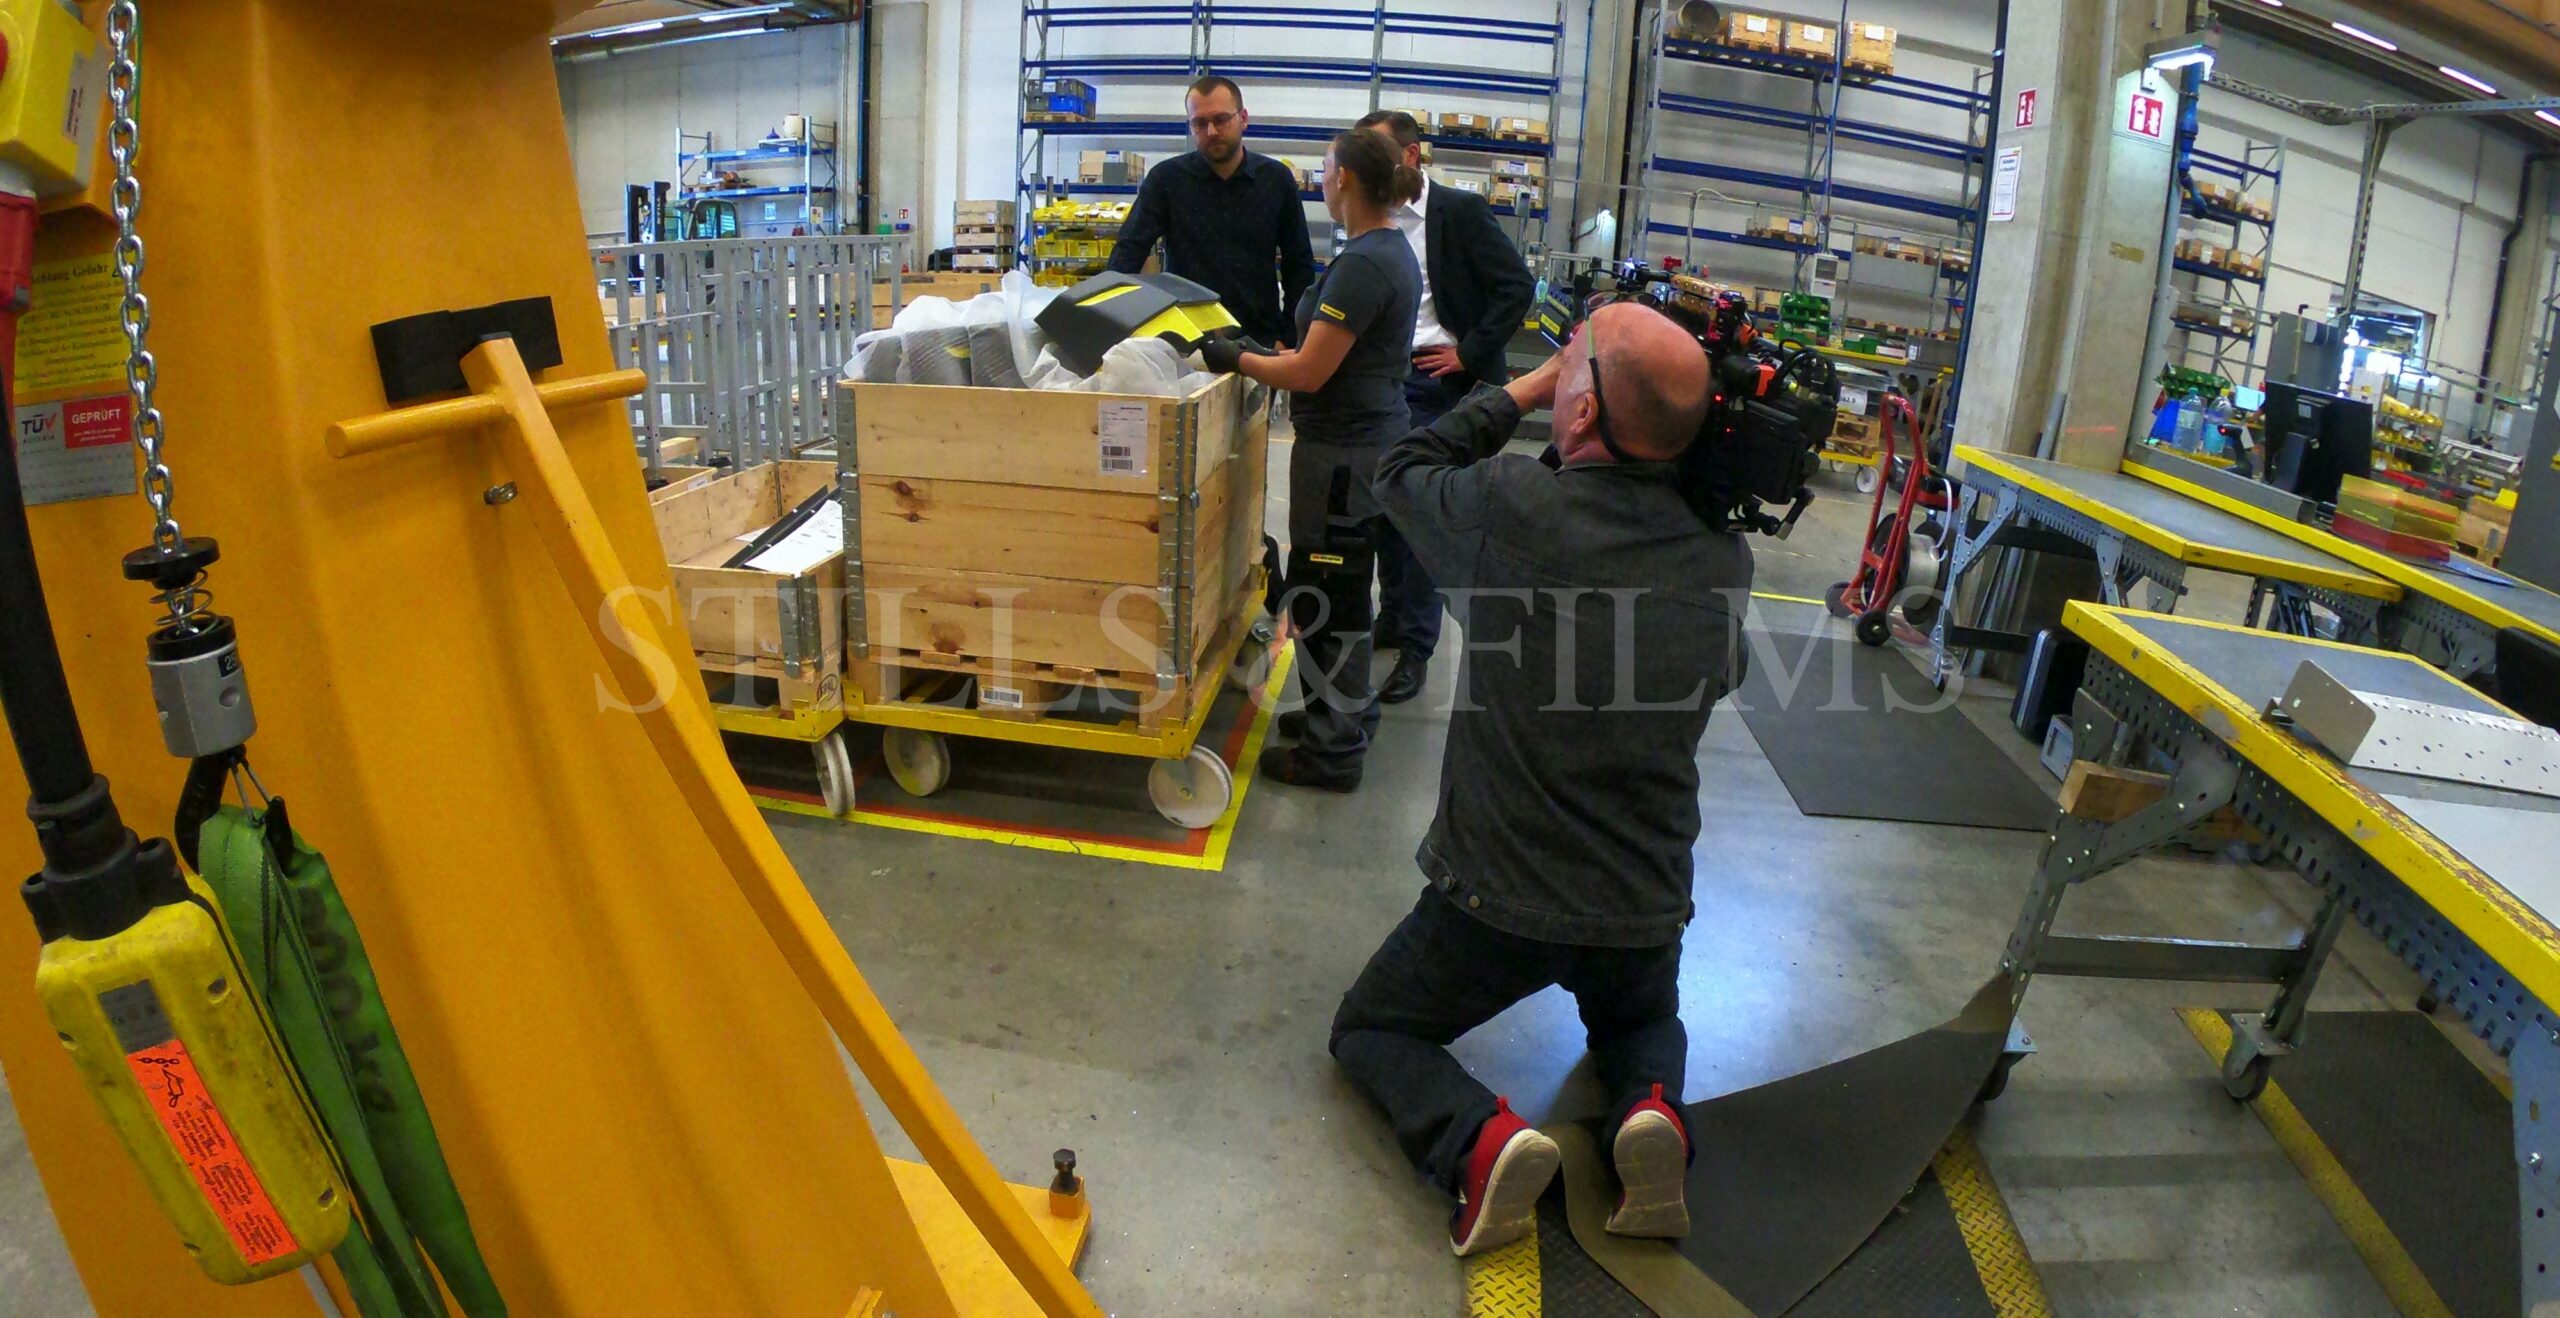 Our video crew is on corporate shoot in a factory in Graz, Austria for a UK client.